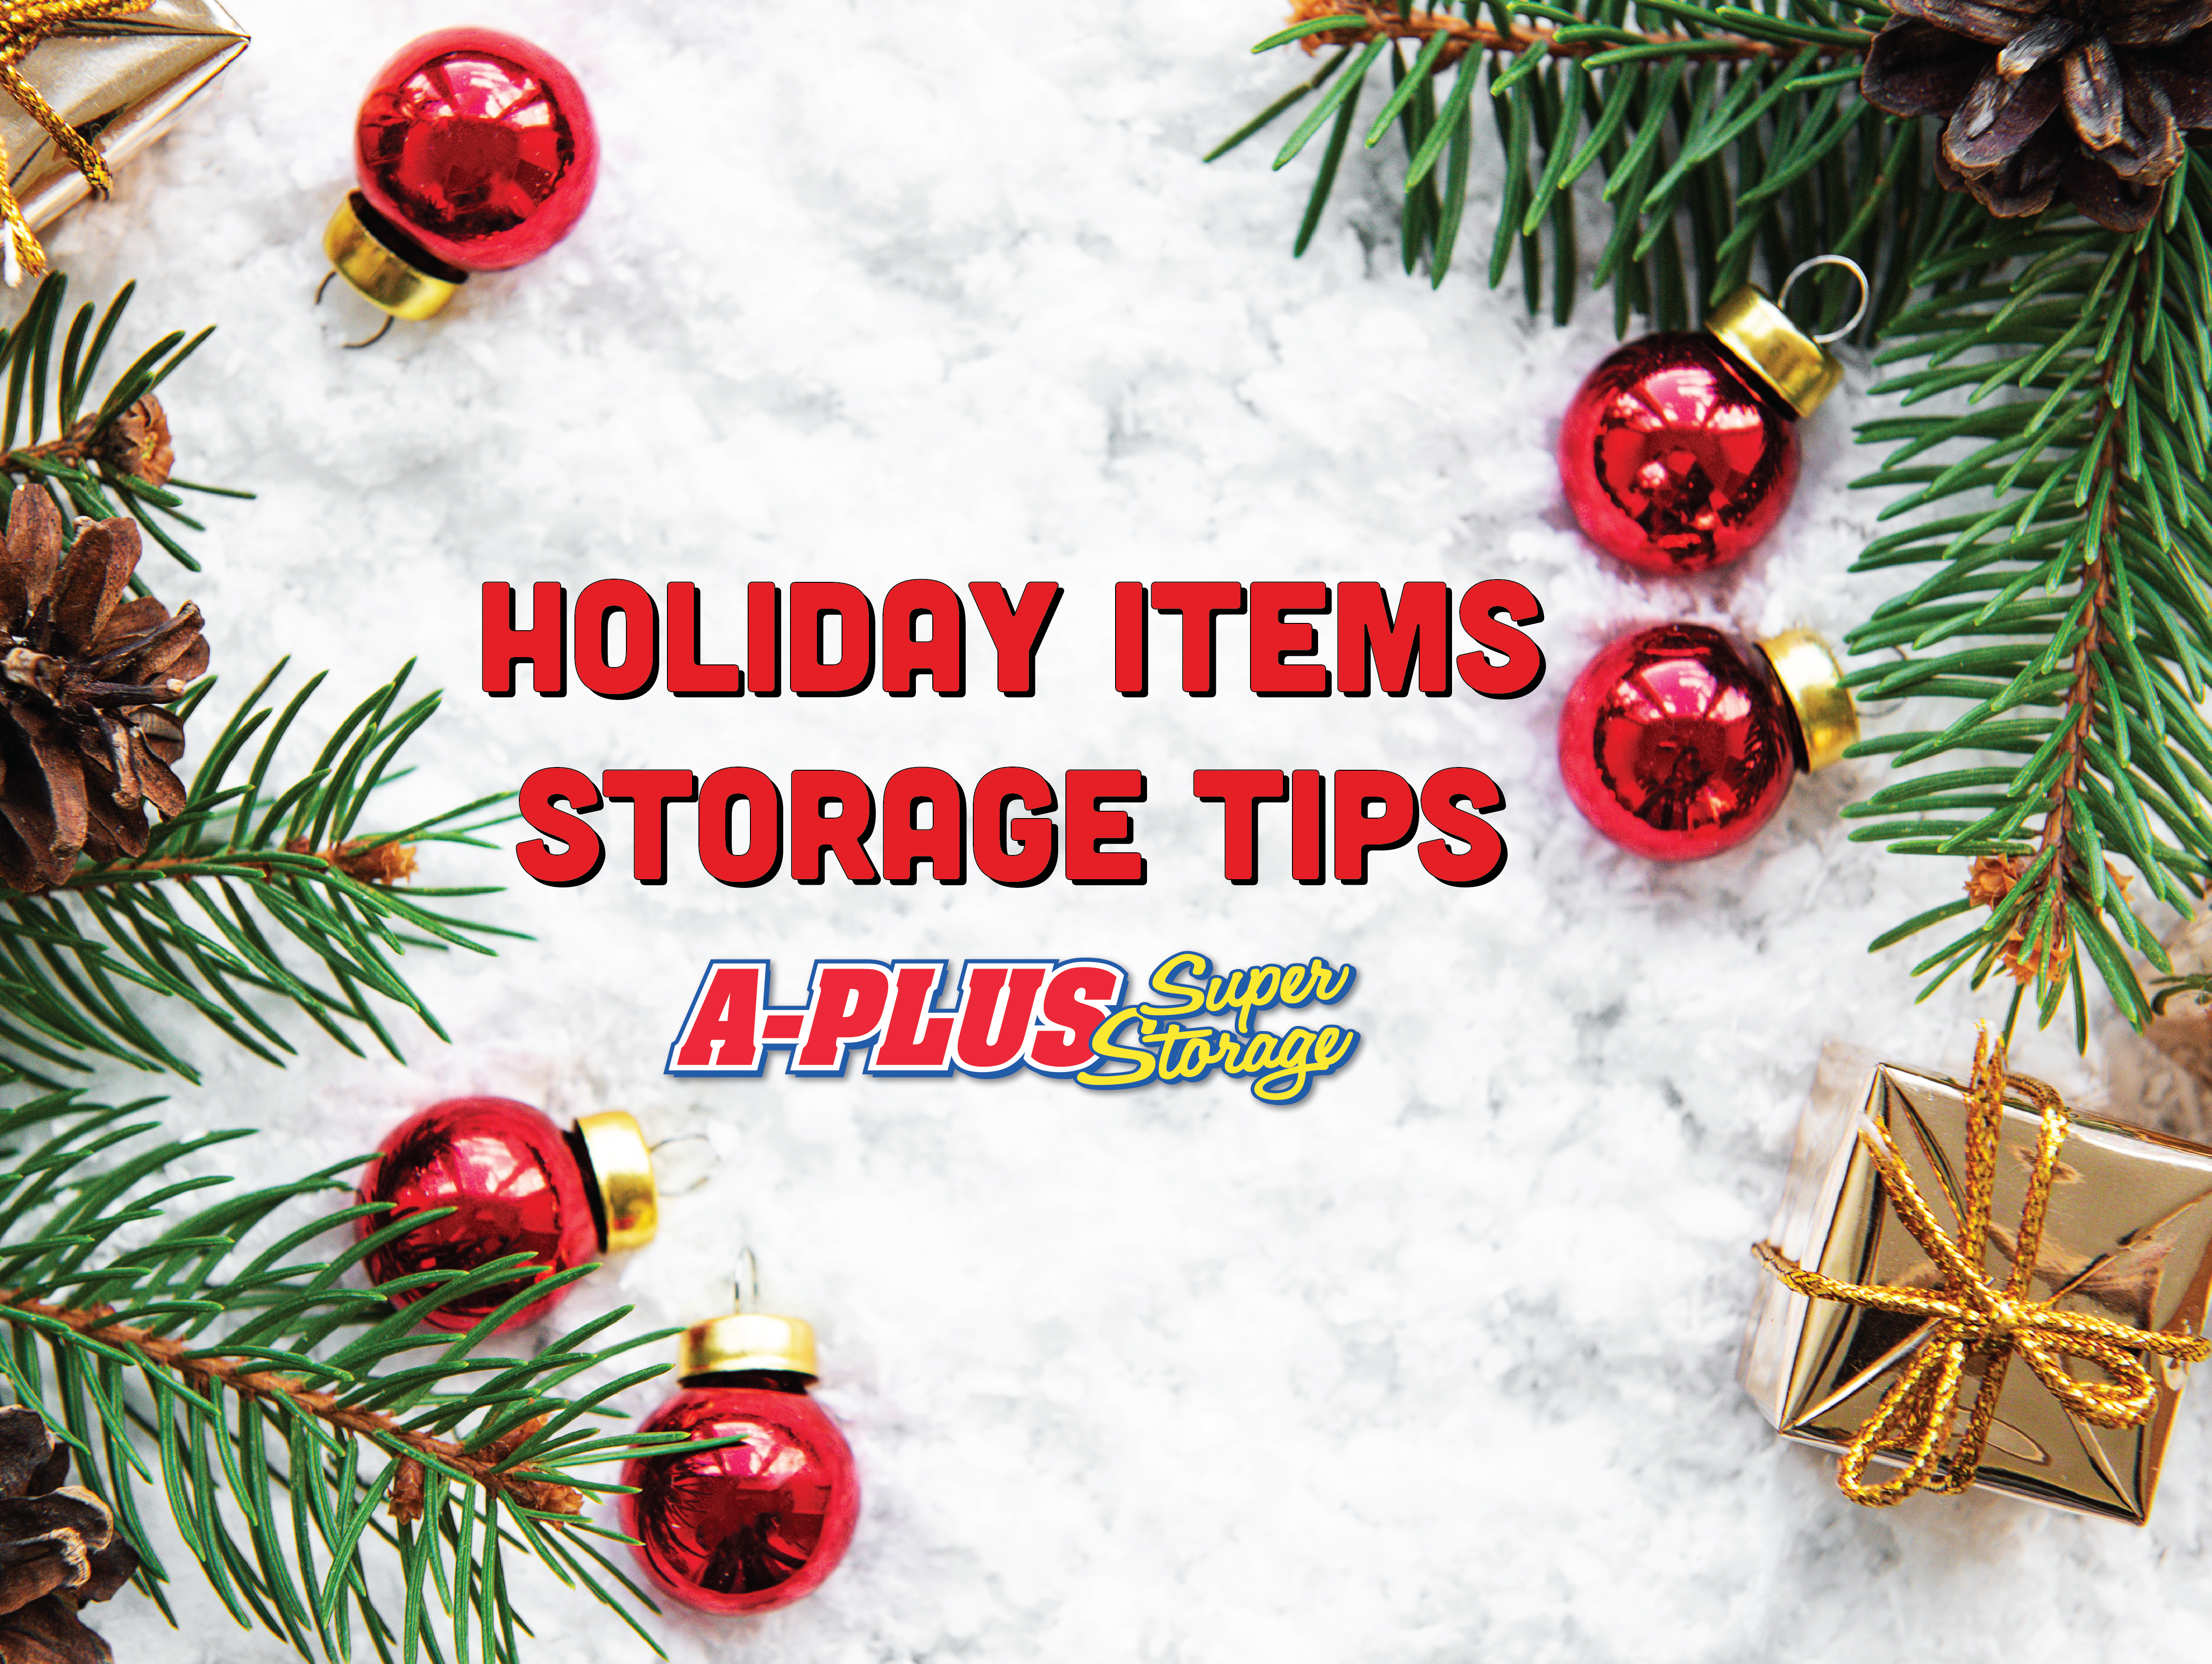 Optimize Storage for Holiday Decor: Tips & Tricks by A Plus Super Storage